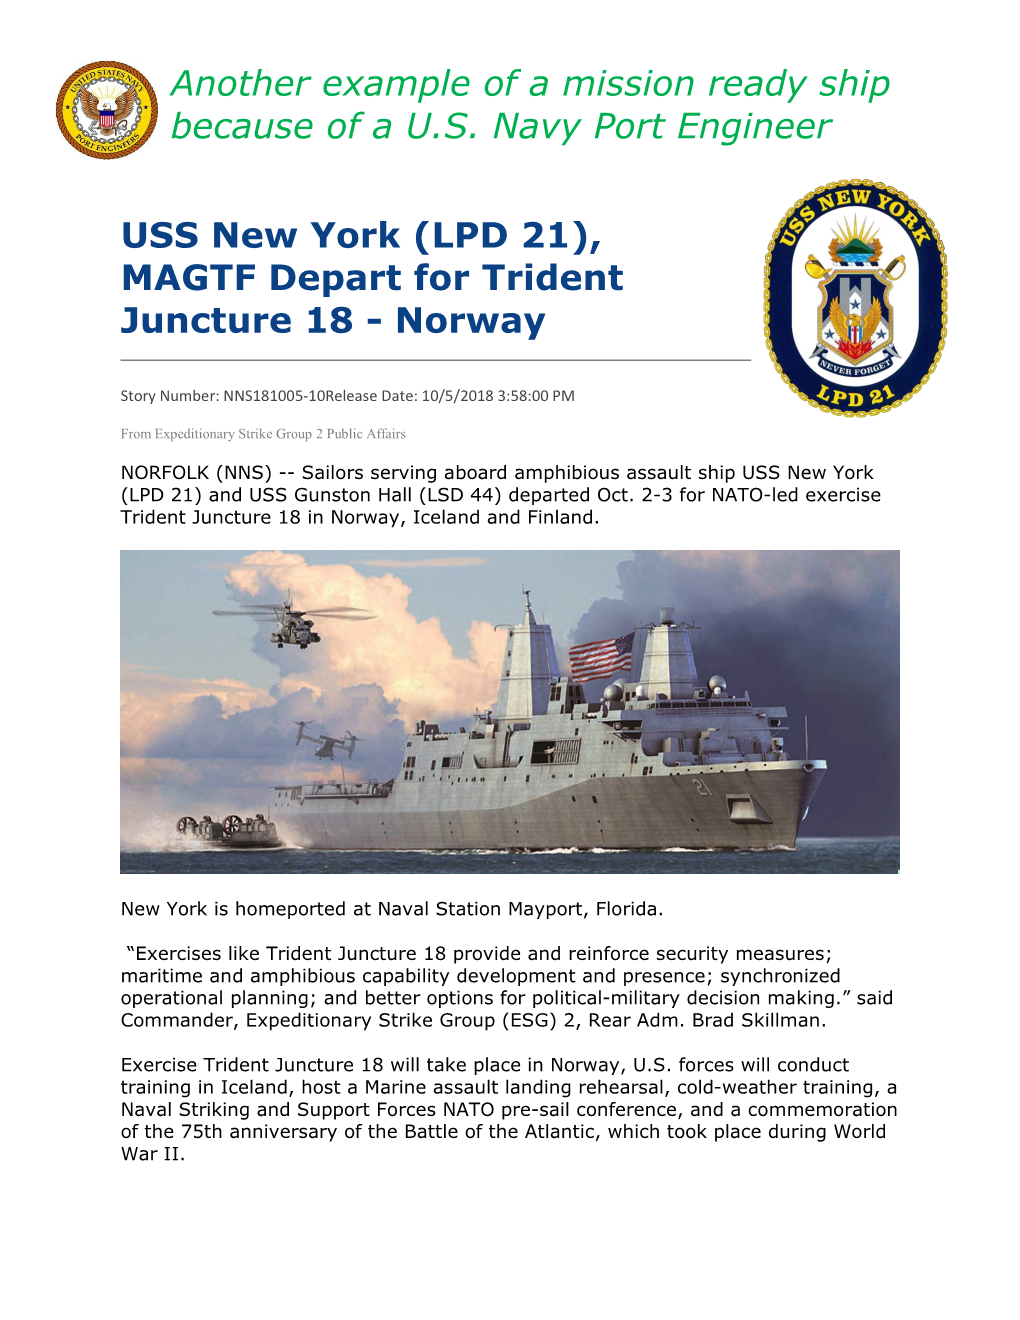 LPD 21), MAGTF Depart for Trident Juncture 18 - Norway